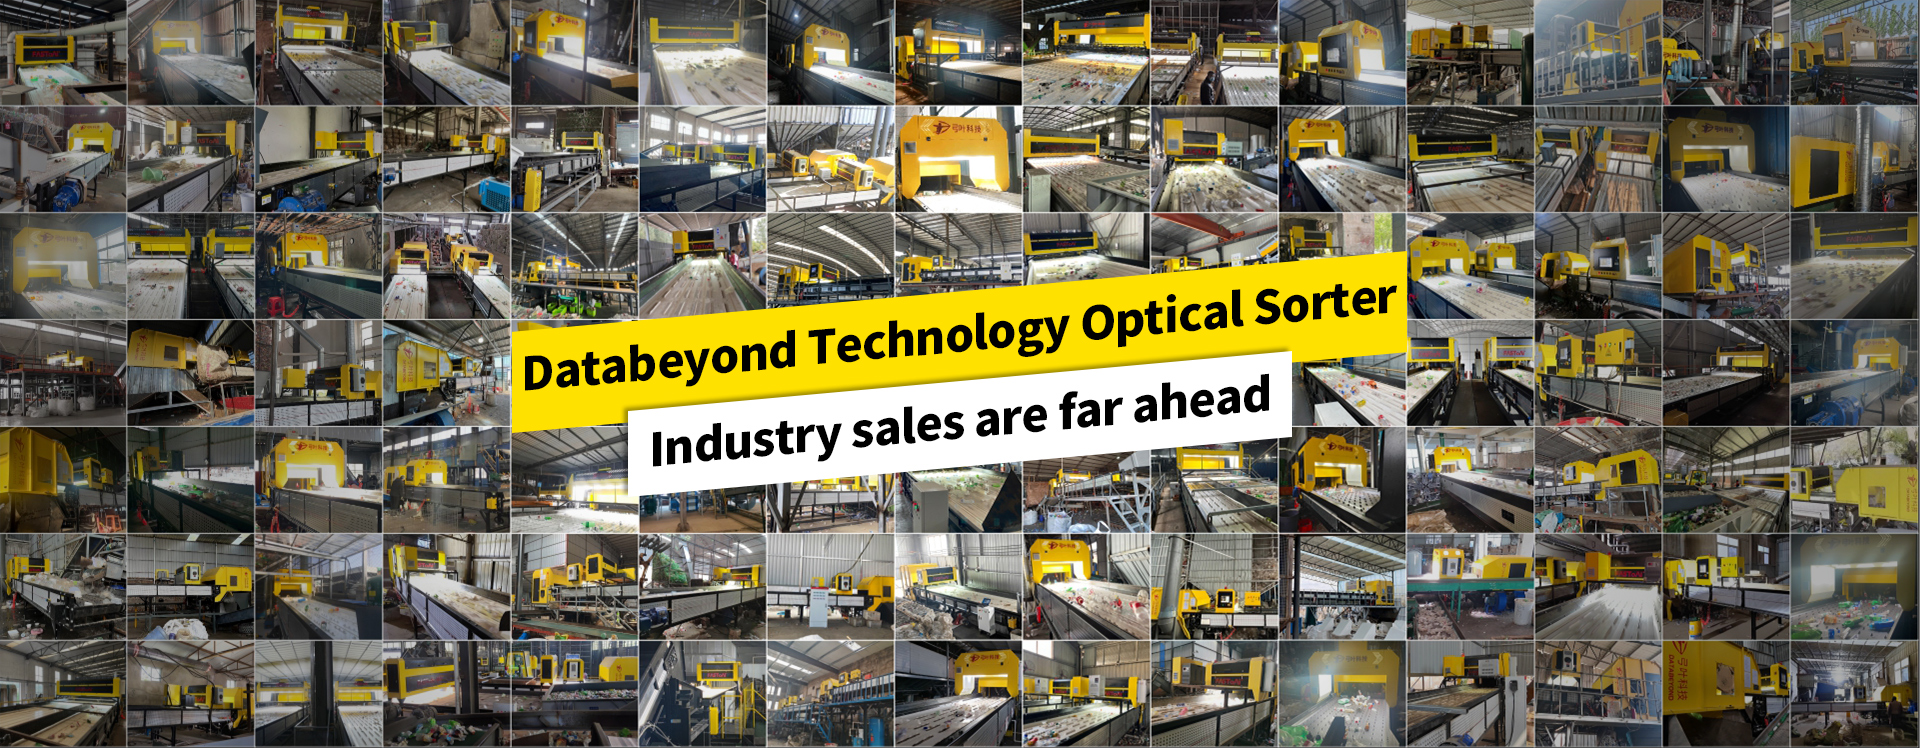 Databeyond Technology Optical Sorter Industry sales are far ahead